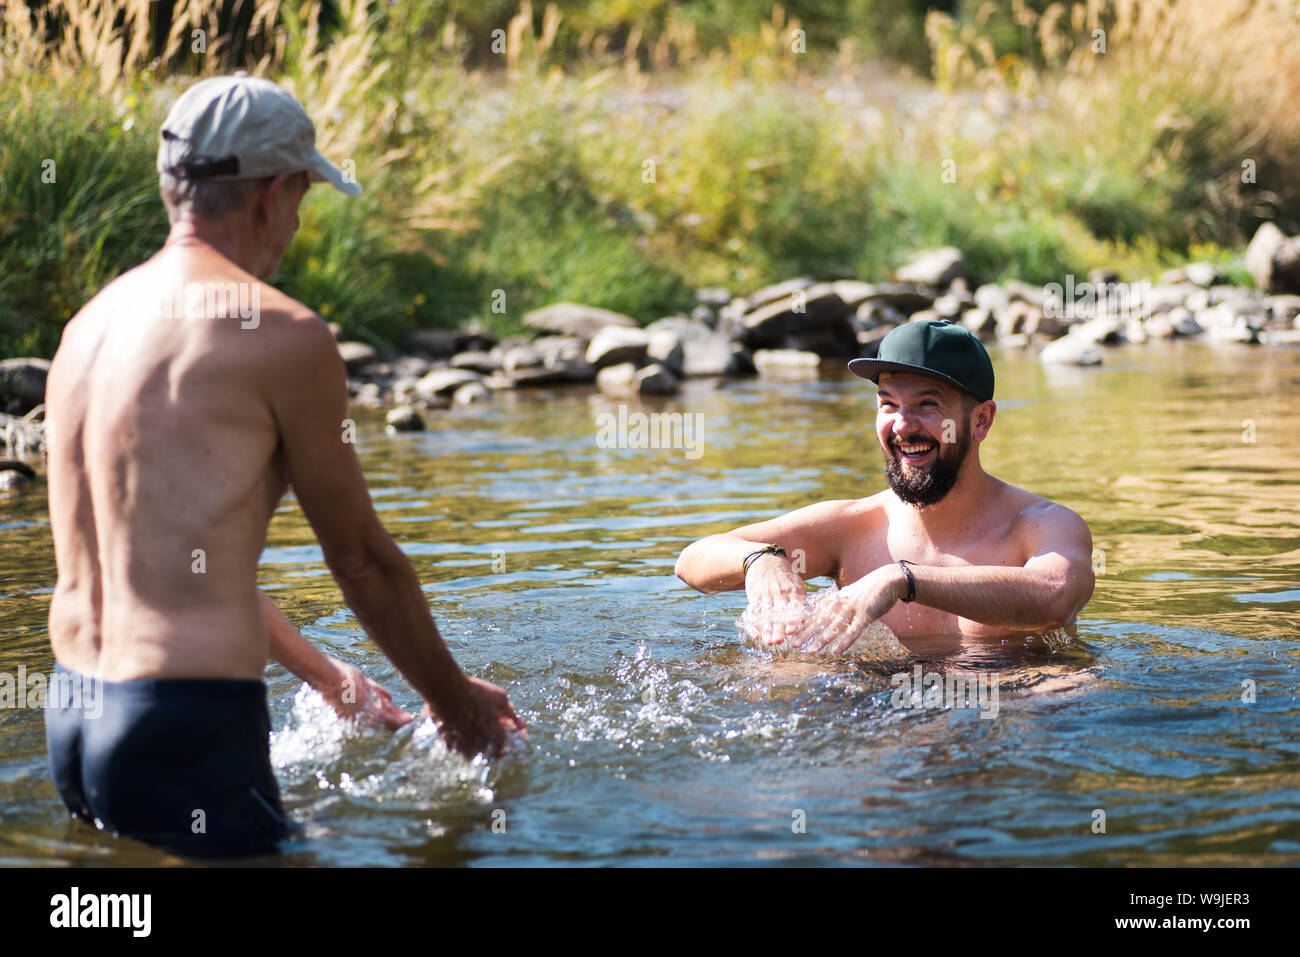 Father and son having fun in the river water on a hot summer day Stock Photo